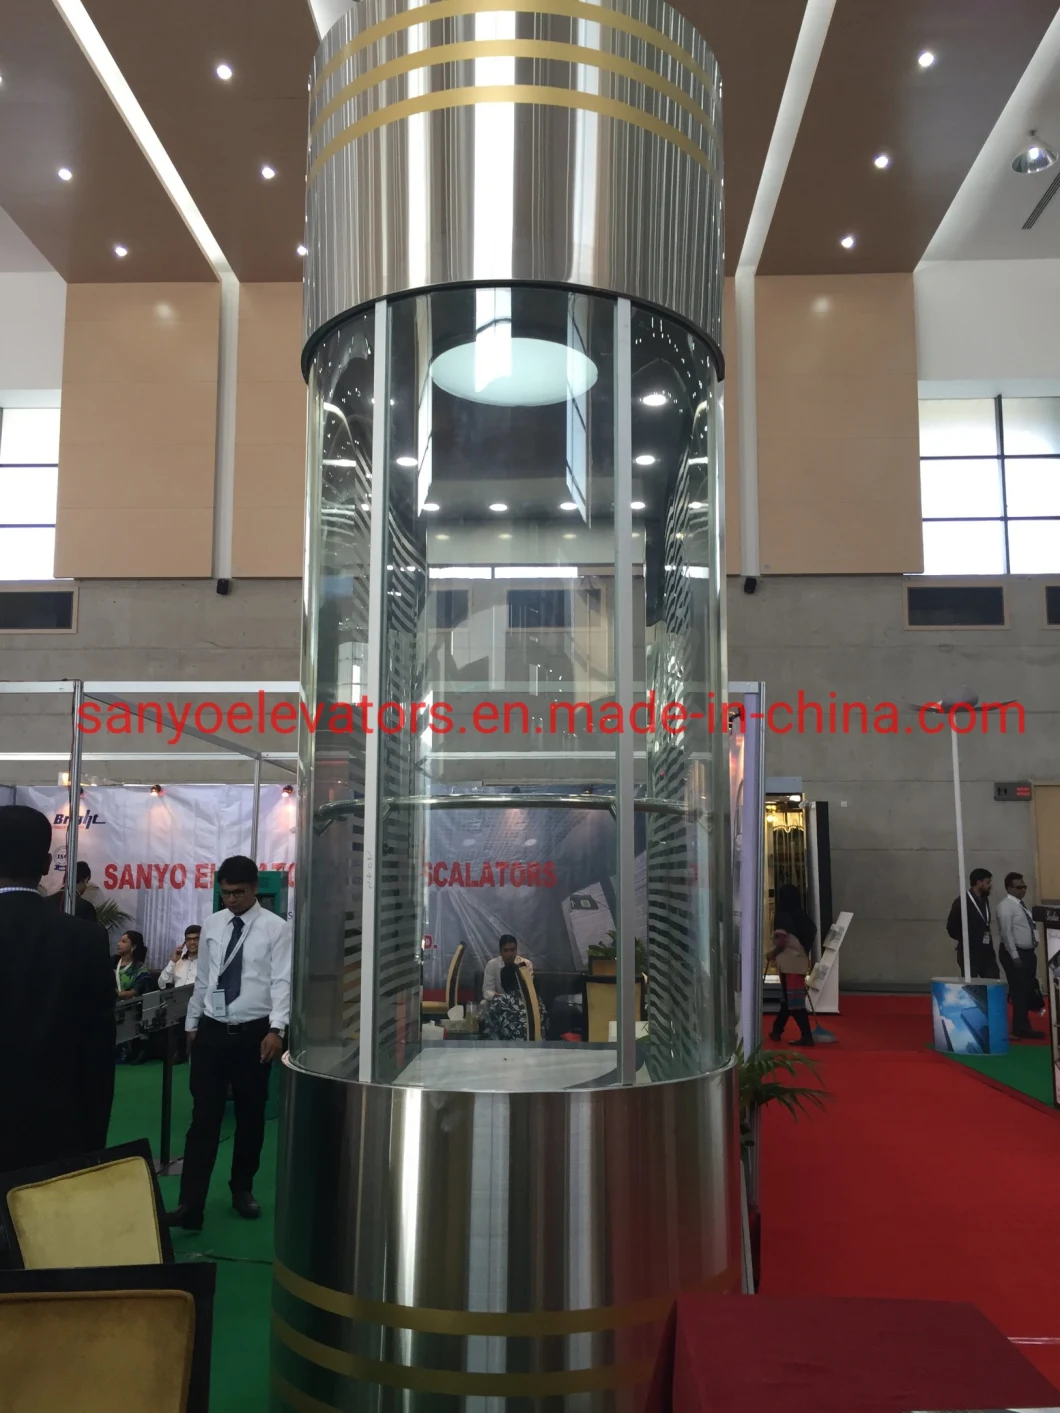 SANYO CE EAC certified Safe and Stable Functions Panoramic Elevator Lift